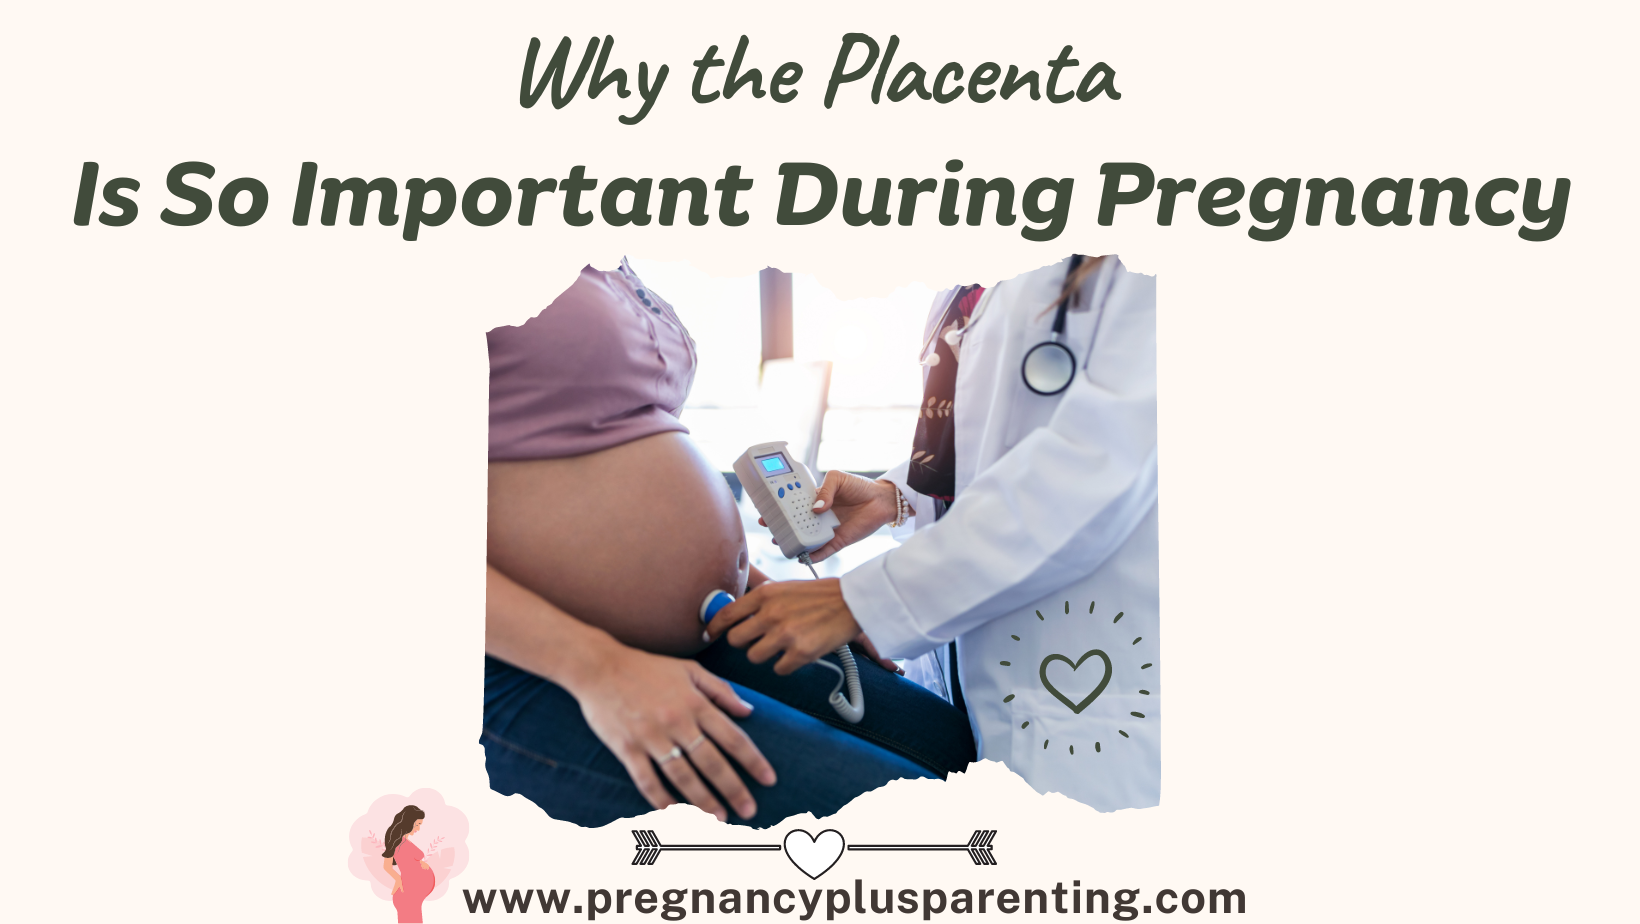 Why the Placenta is So Important During Pregnancy